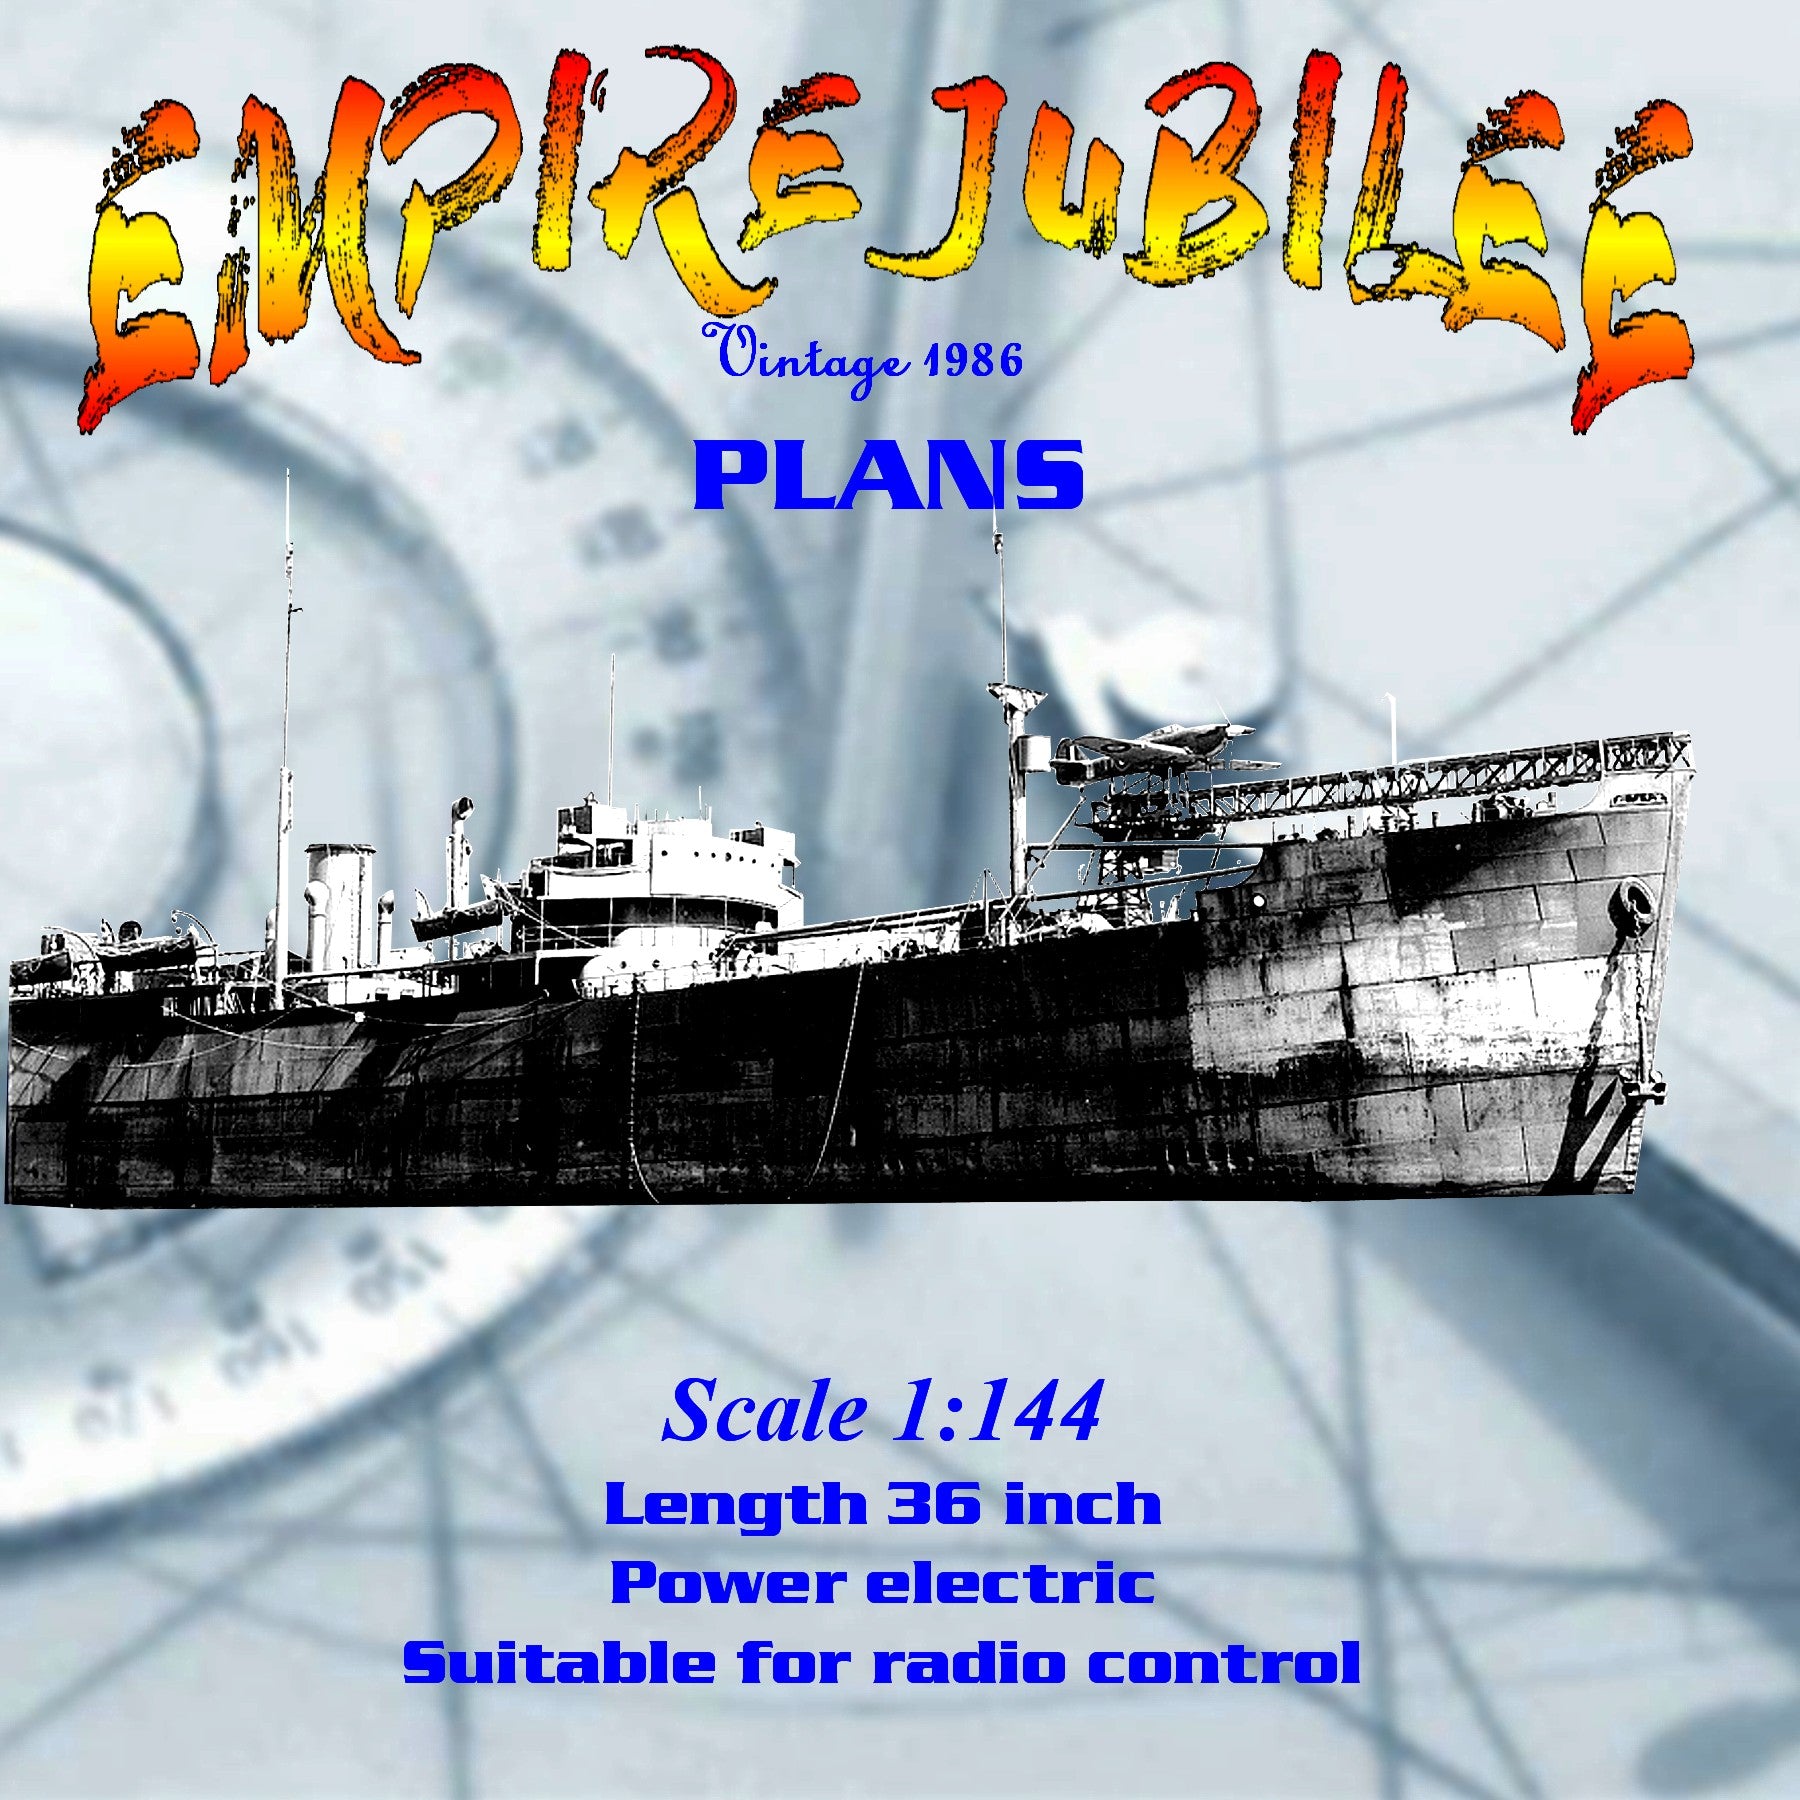 full size printed plans scale 1:144 based upon wwii catapult aircraft merchantship suitable for radio control